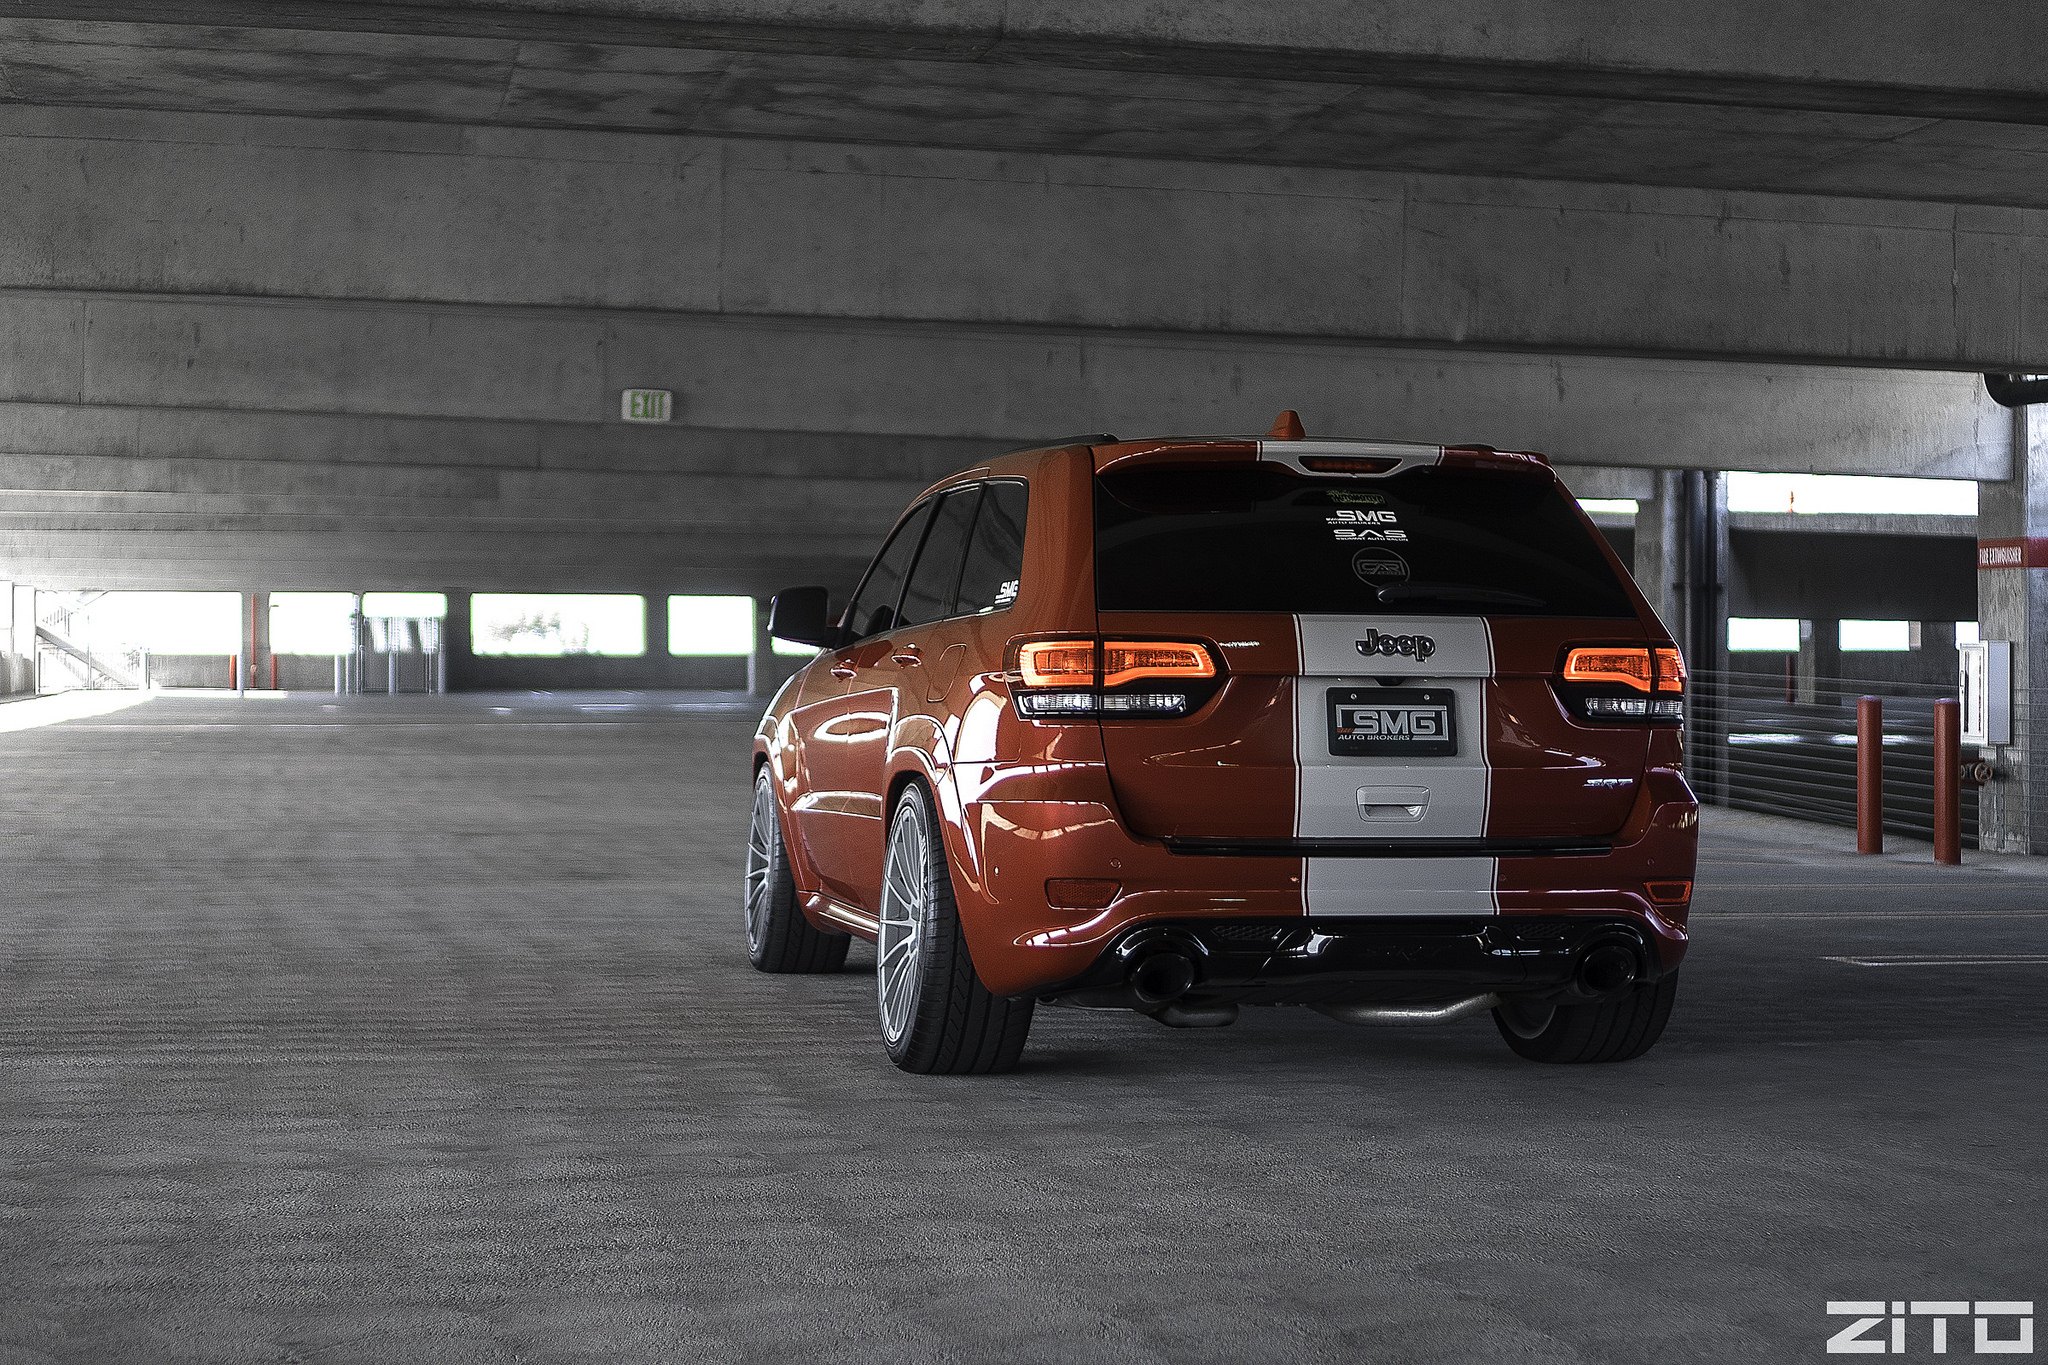 Aftermarket Rear Diffuser on Orange Jeep Grand Cherokee - Photo by Zito Wheels